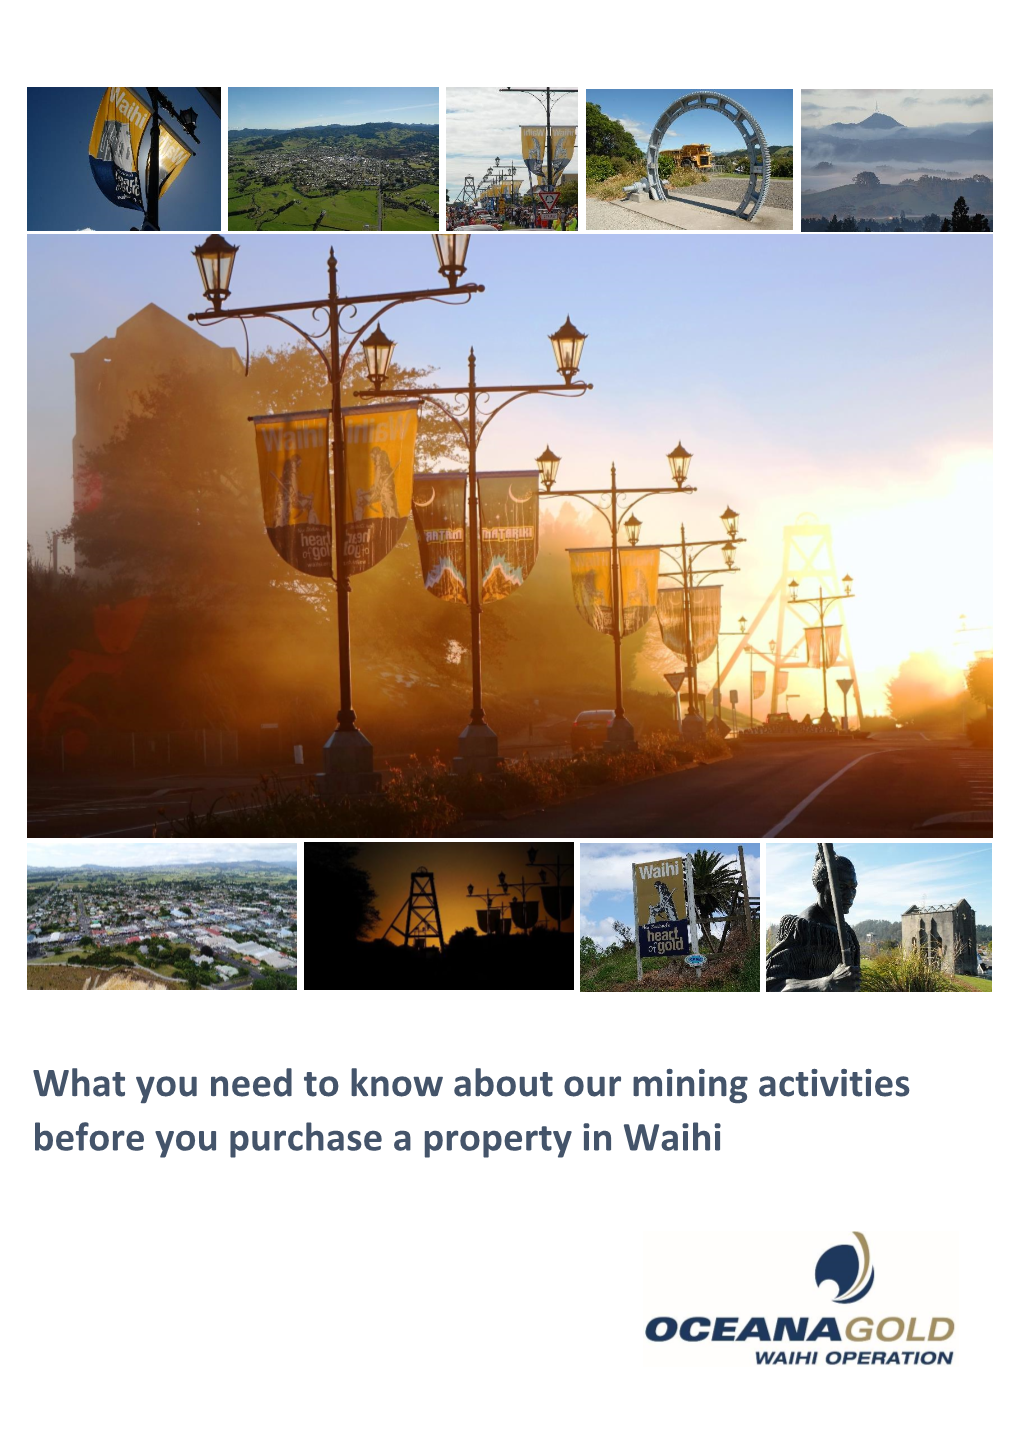 What You Need to Know About Our Mining Activities Before You Purchase a Property in Waihi